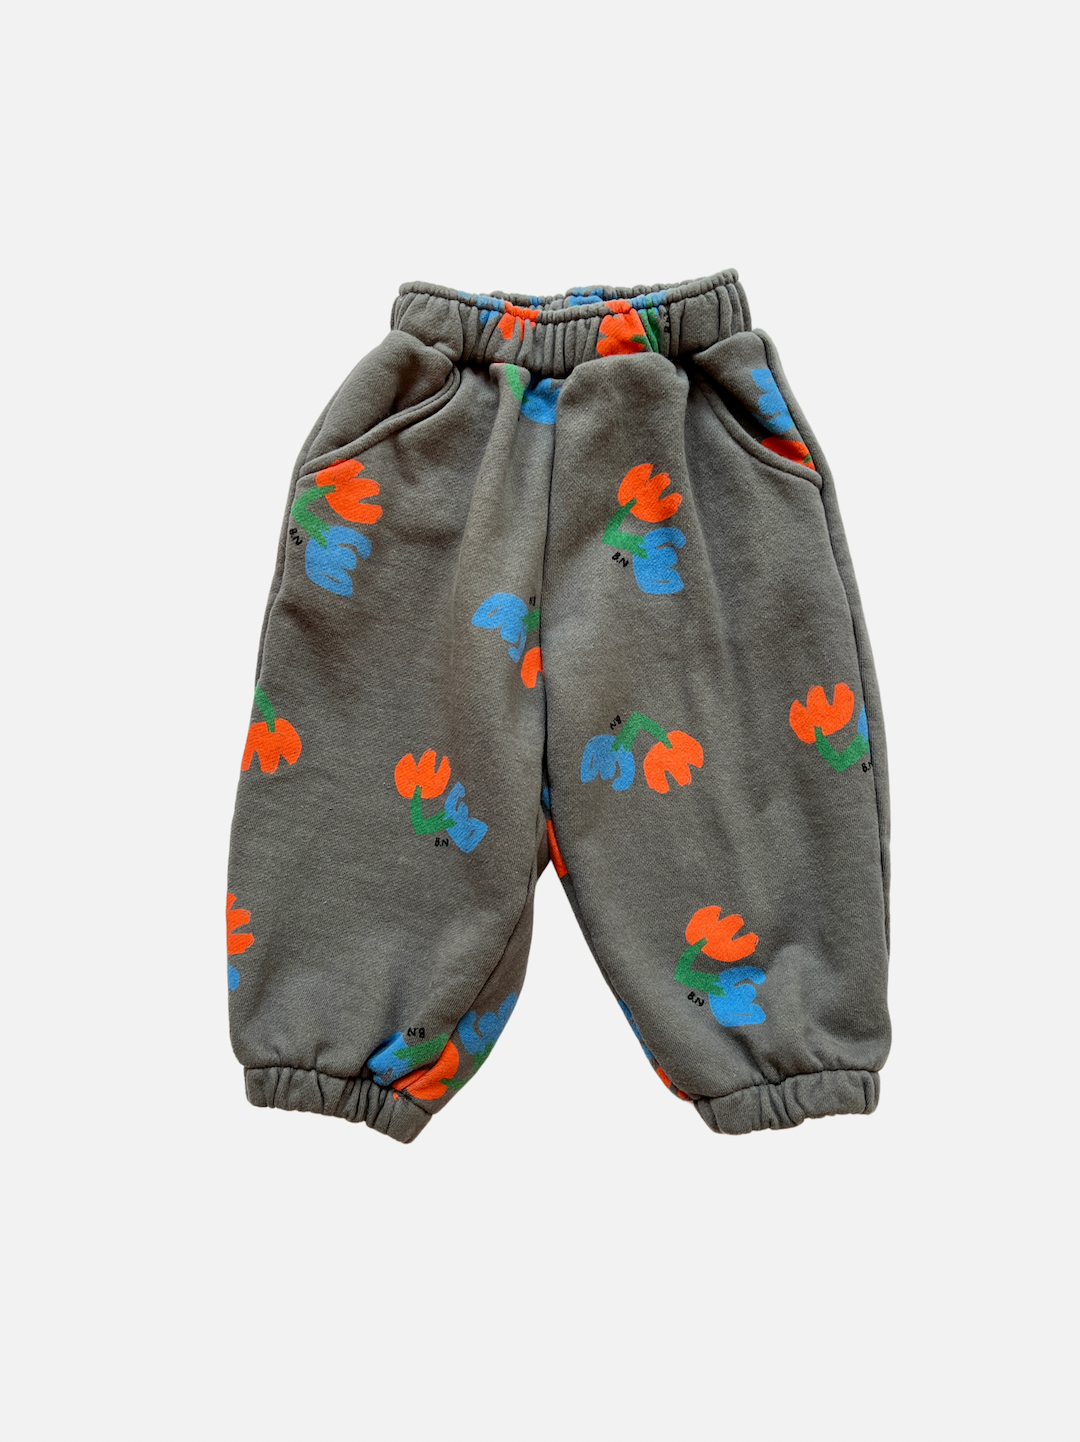 Pair of kids' sweatpants with orange and blue flowers on a slate gray background, front view